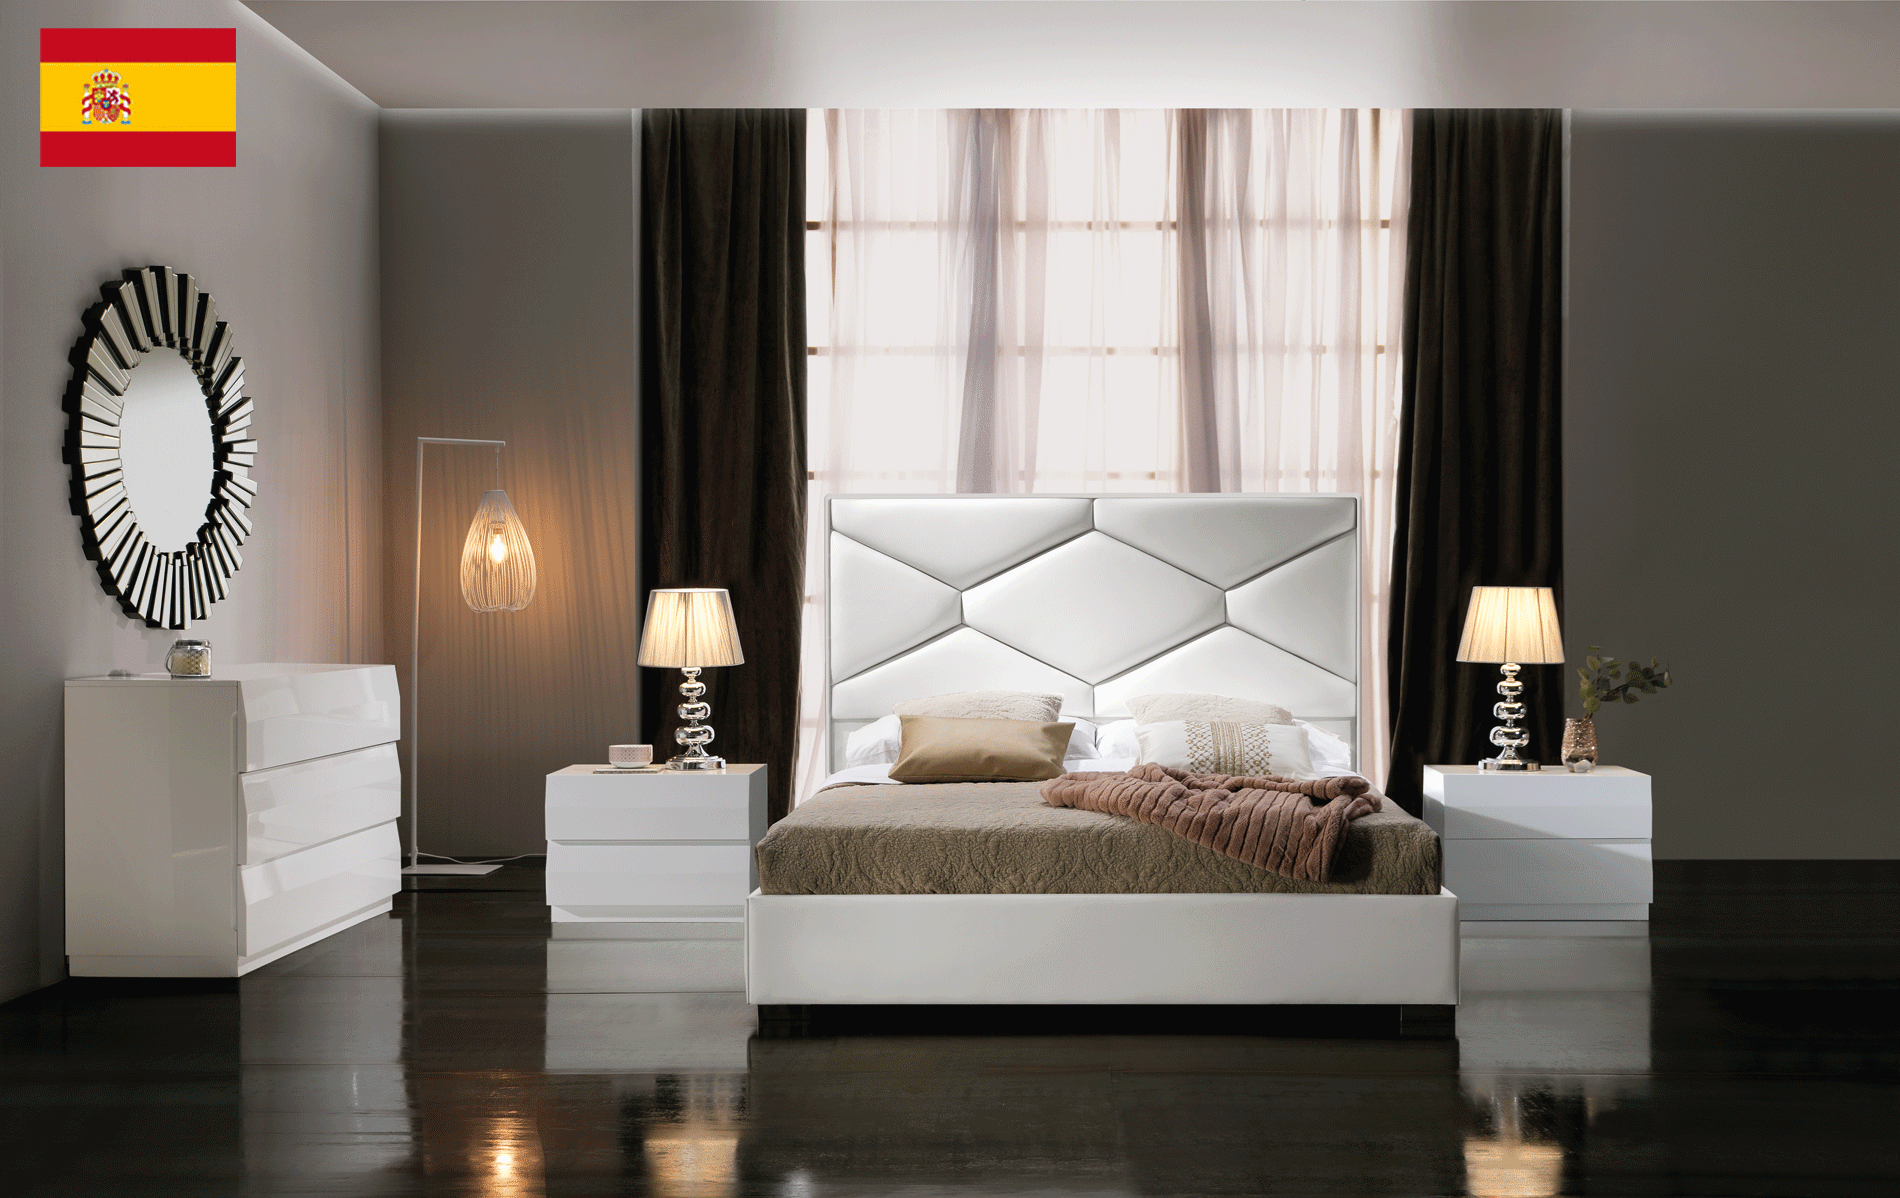 Bedroom Furniture Classic Bedrooms QS and KS Martina LUX Bedroom Storage White, M152, C152, E100